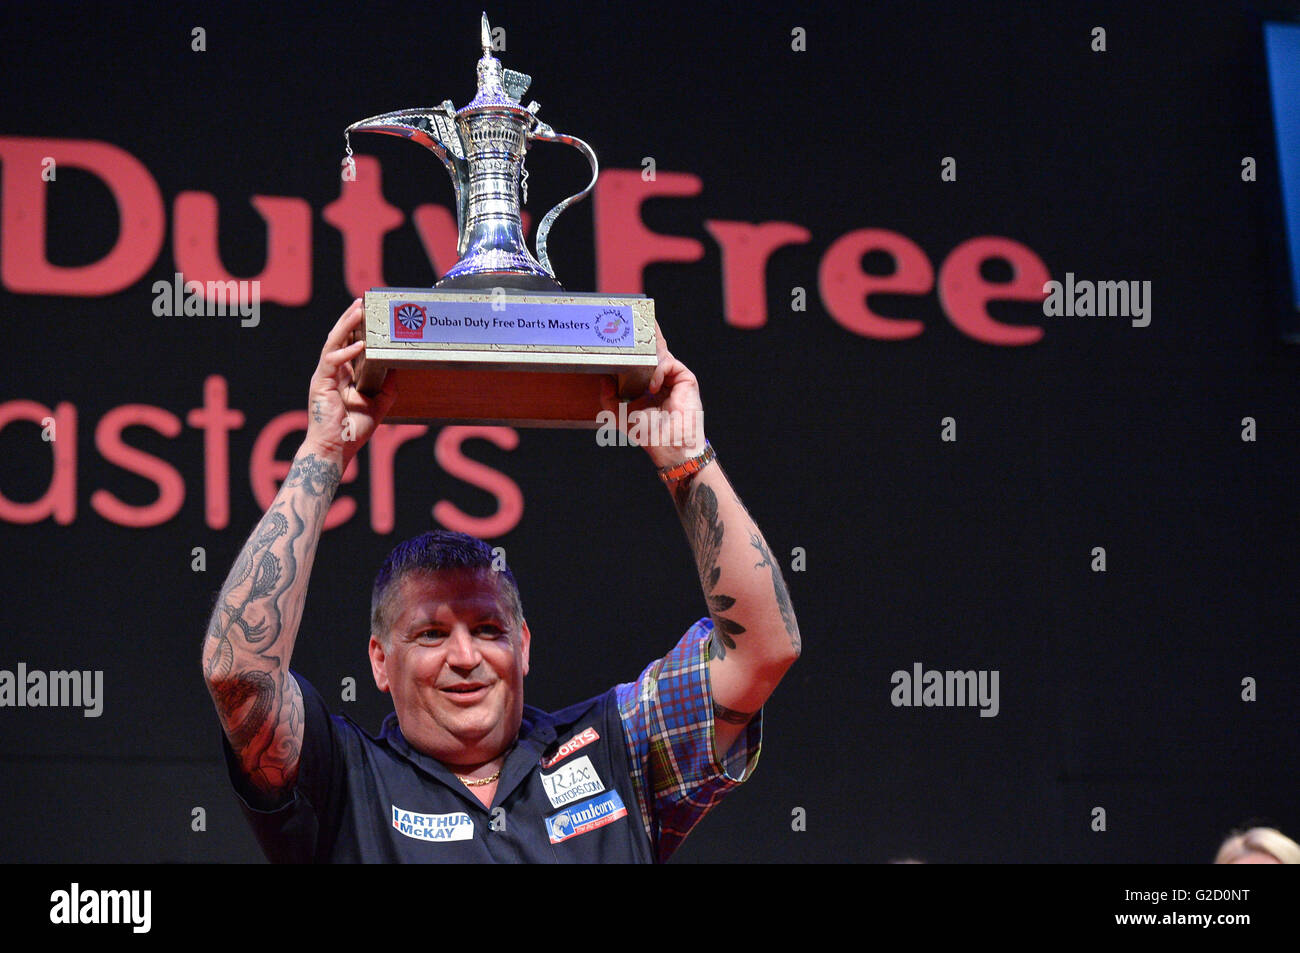 DUBAI, UAE, 27th March 2016. Scotland's Gary Anderson celebrates after  receiving the the 2016 Dubai Duty Free Darts Masters trophy. Current PDC  World Champion Anderson beat defending three time DDF Darts Masters